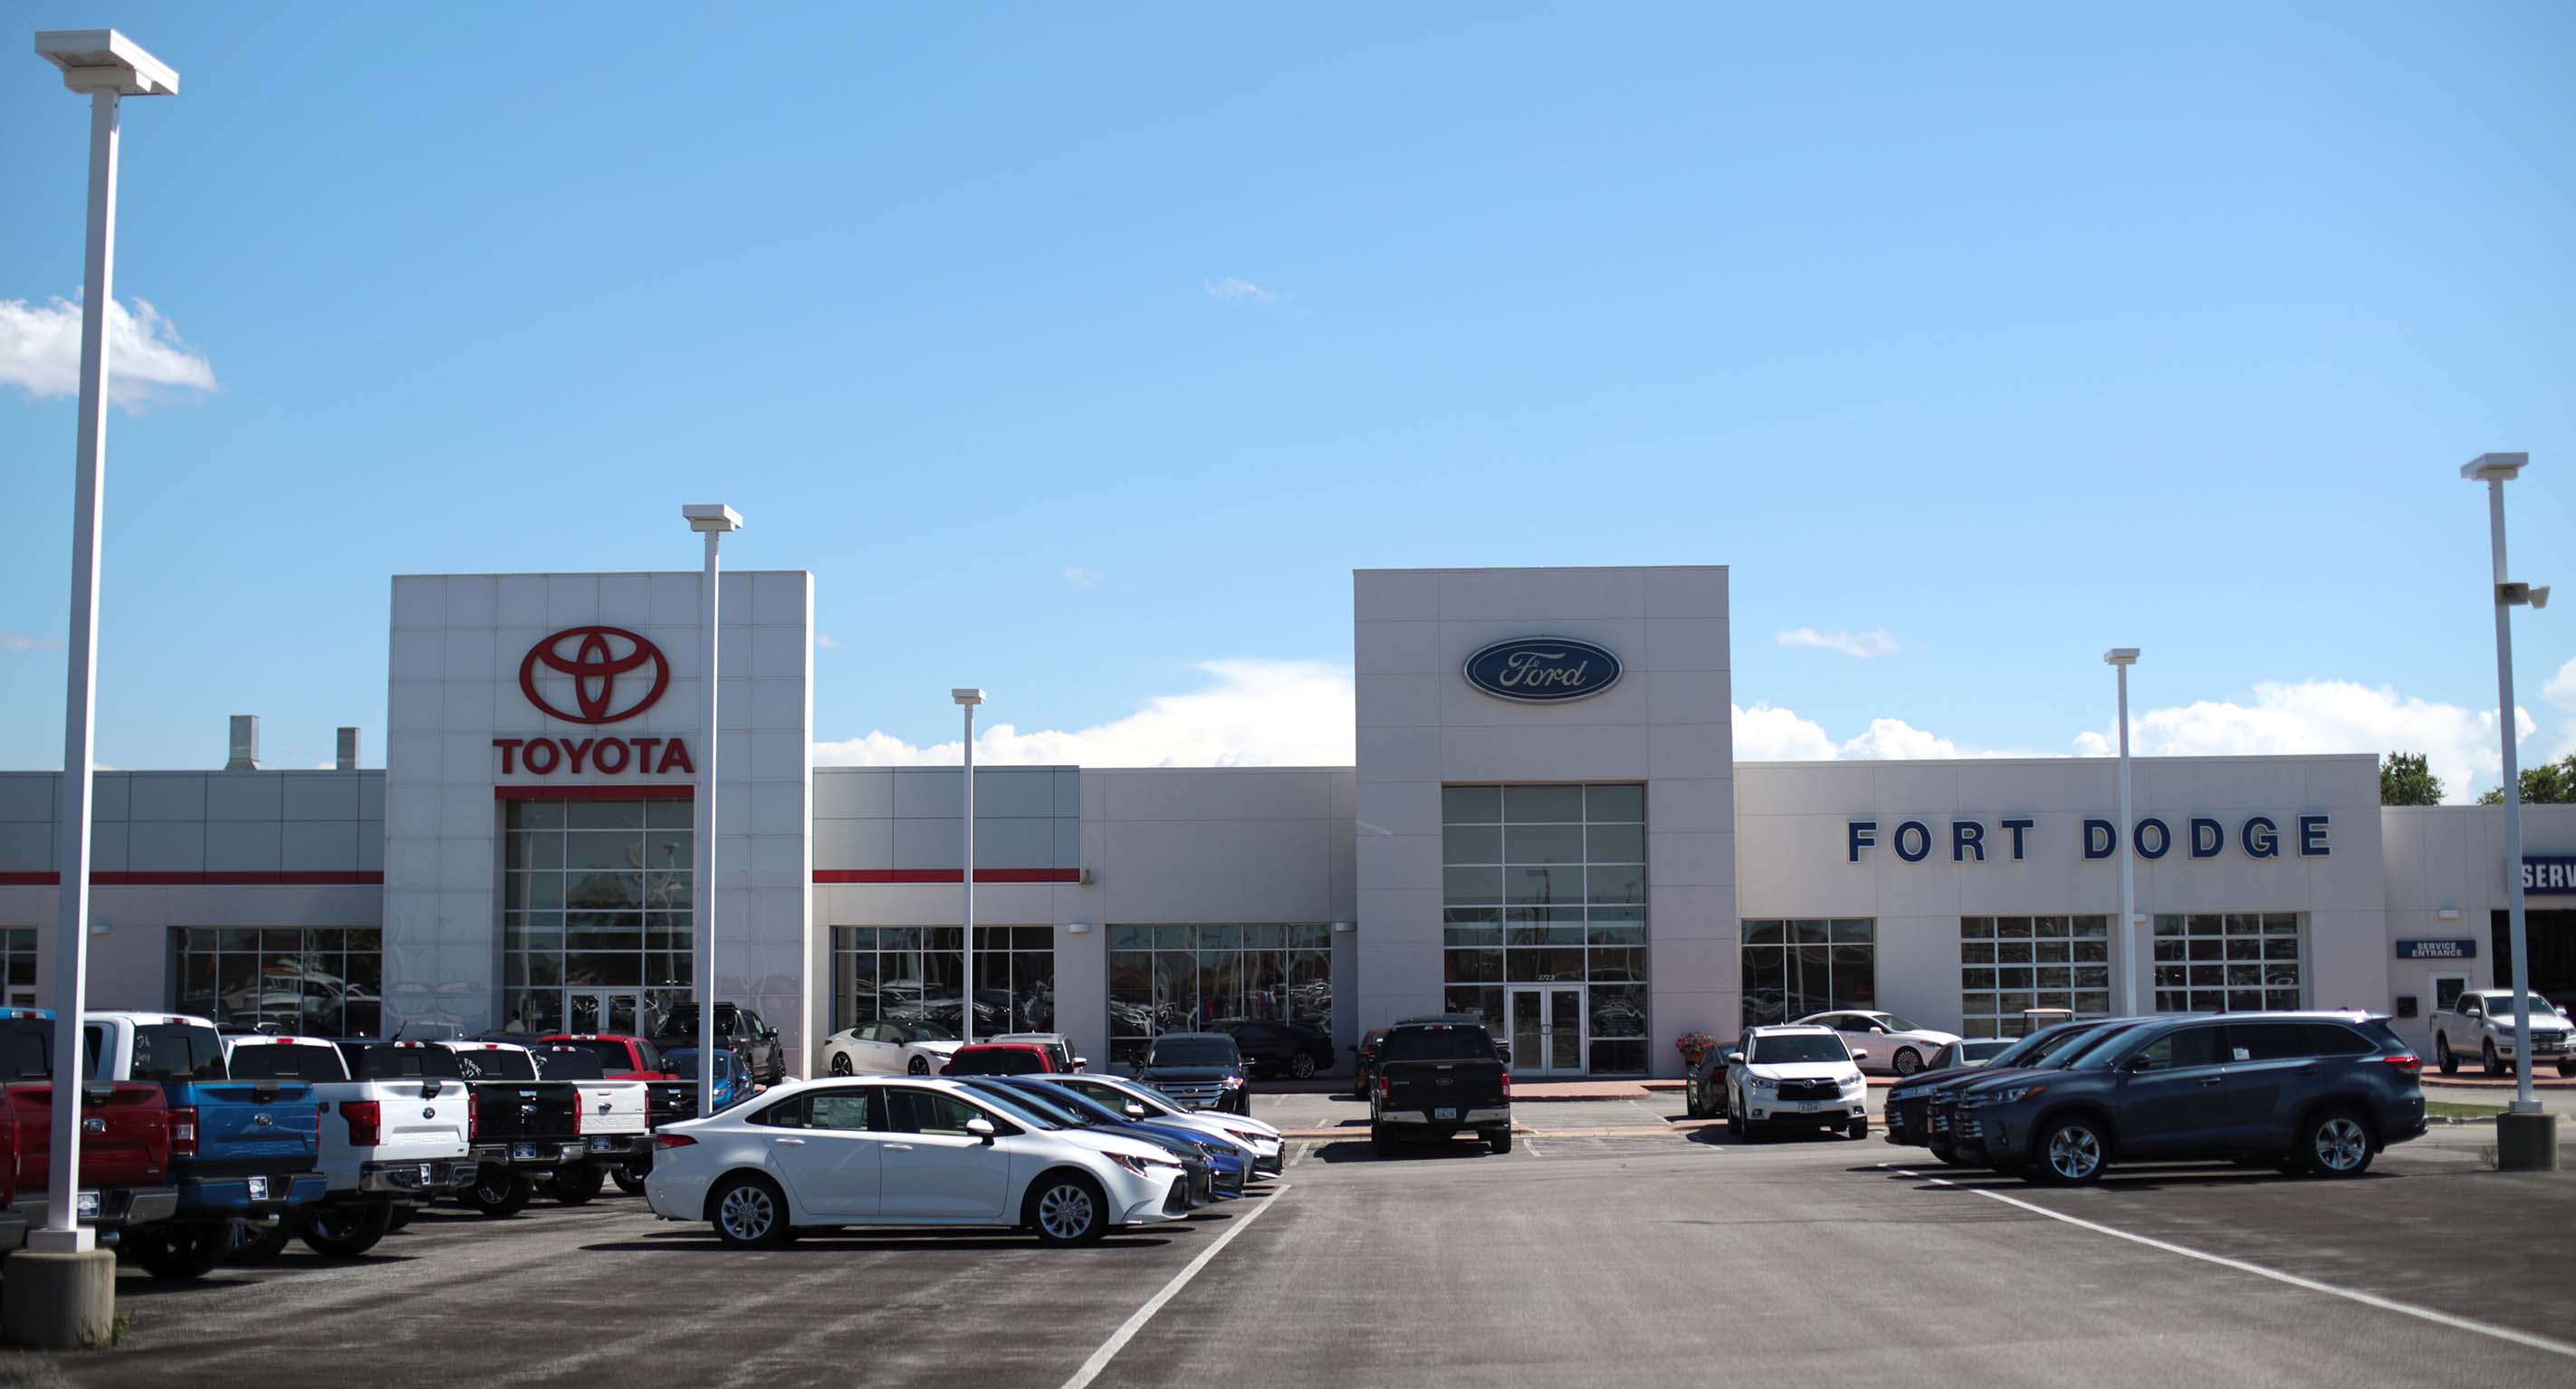 Fort Dodge Ford in Fort Dodge, IA